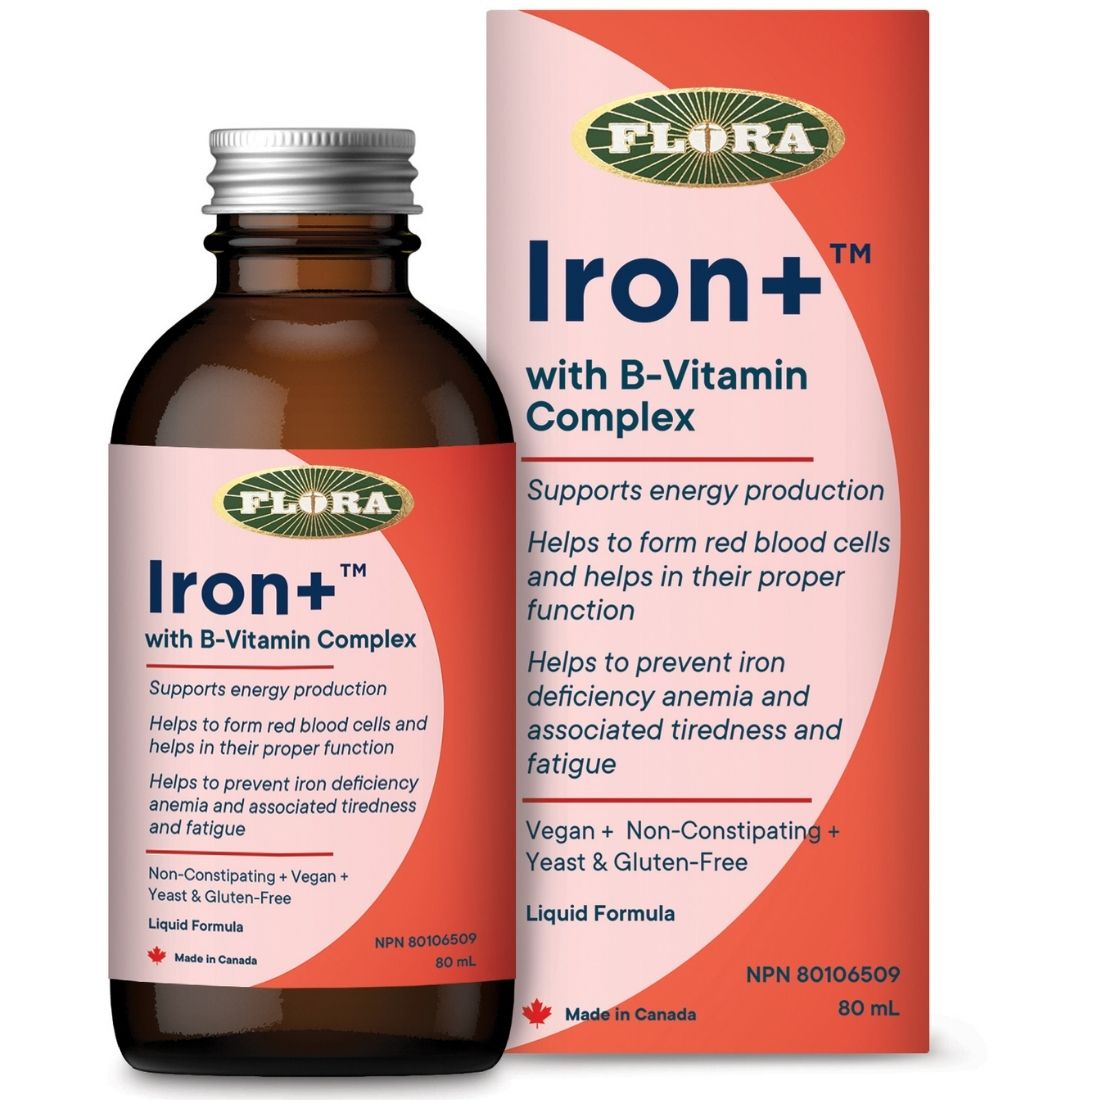 Flora Iron Plus B-Complex Liquid Iron Formula, Highly Absorbably, Non-constipating, Vegan